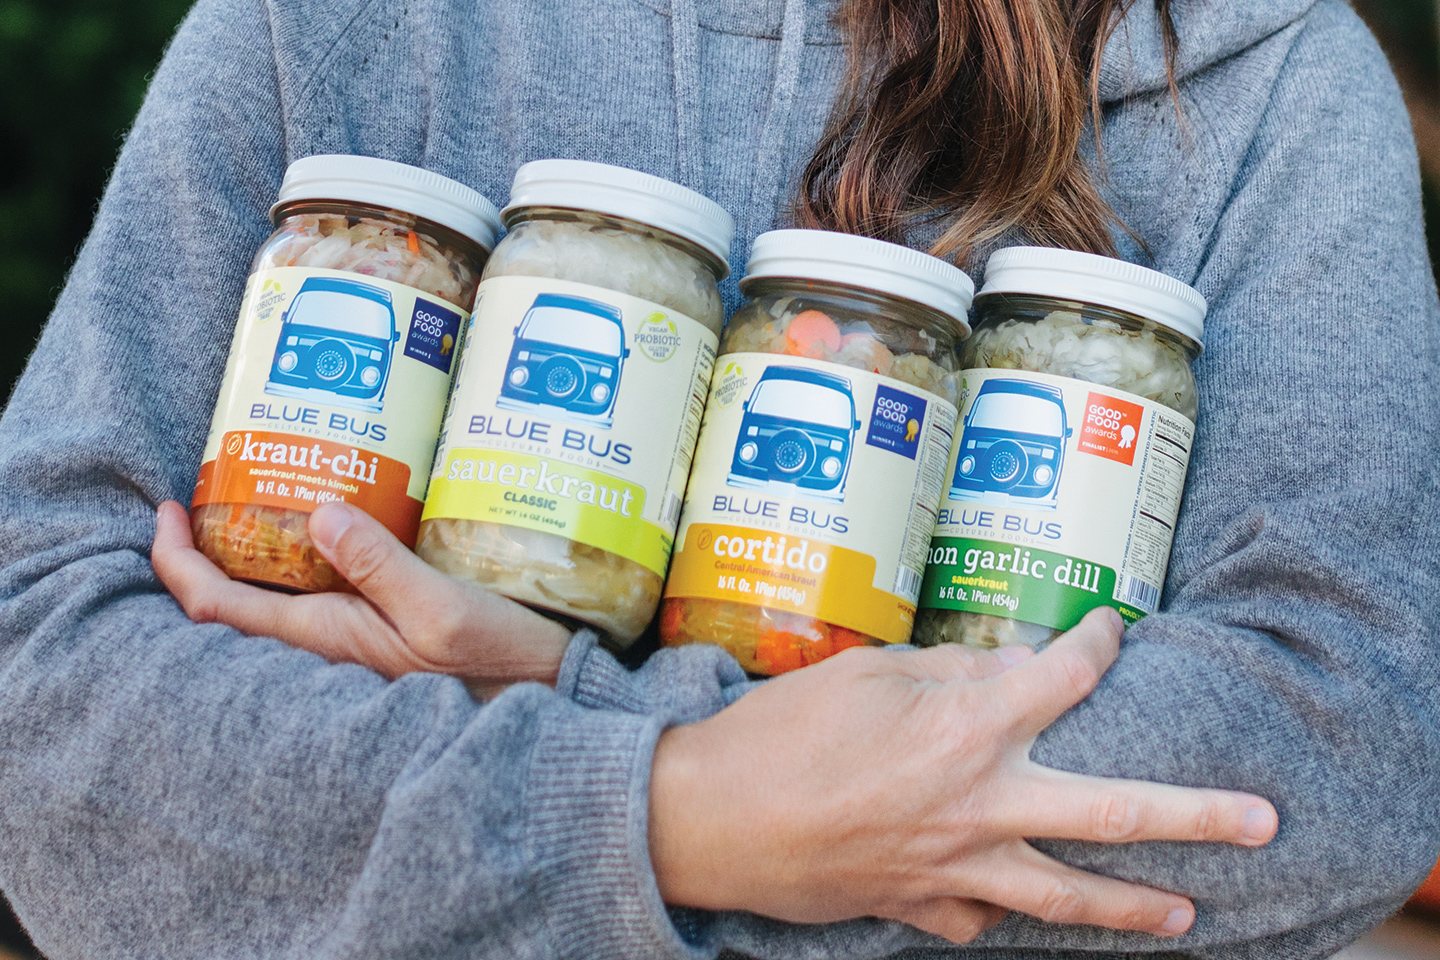 A person in a grey sweatshirt holding 4 jars of Blue Bus saurkraut.